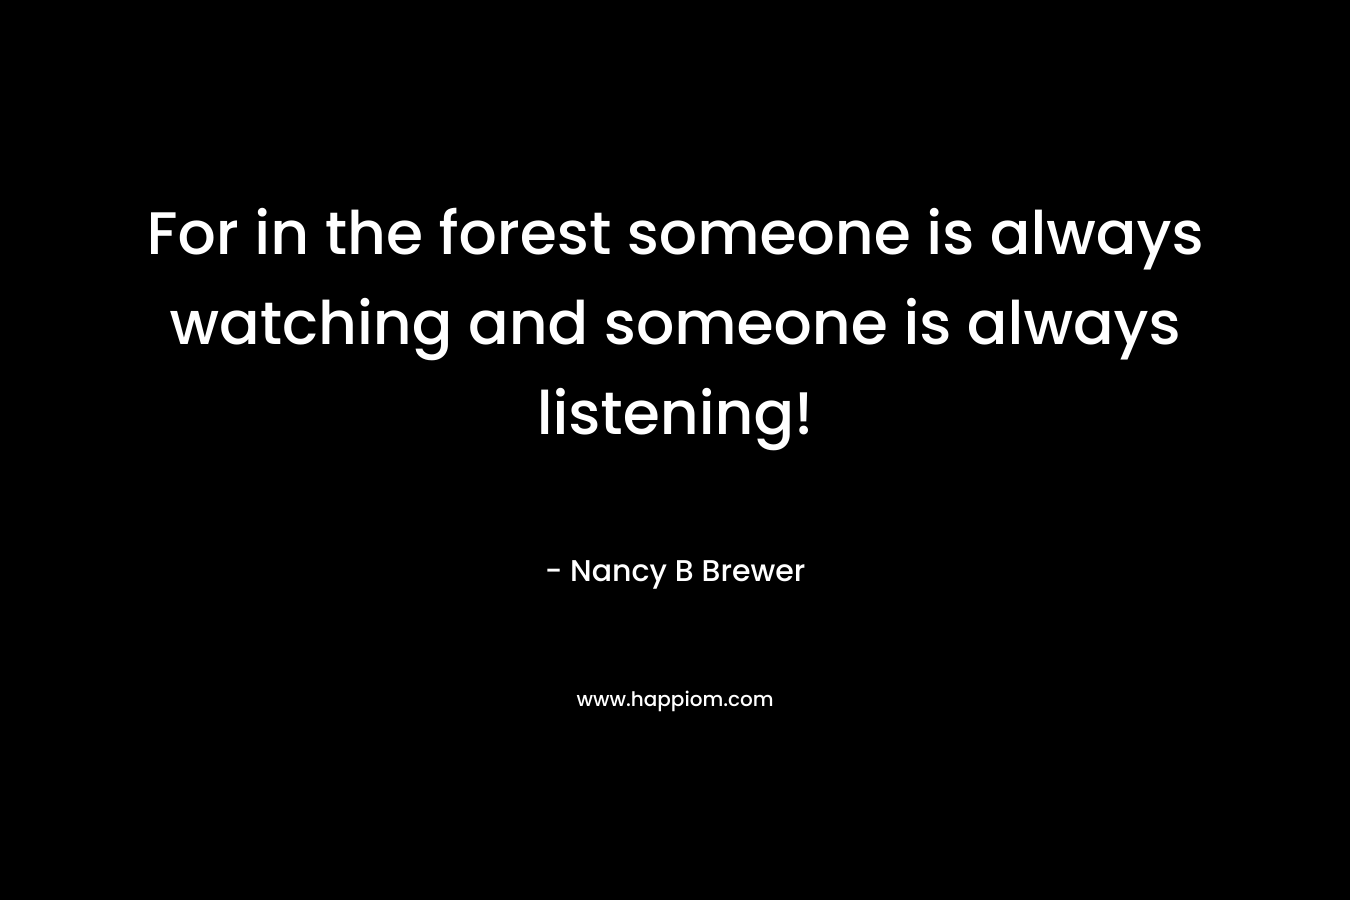 For in the forest someone is always watching and someone is always listening!